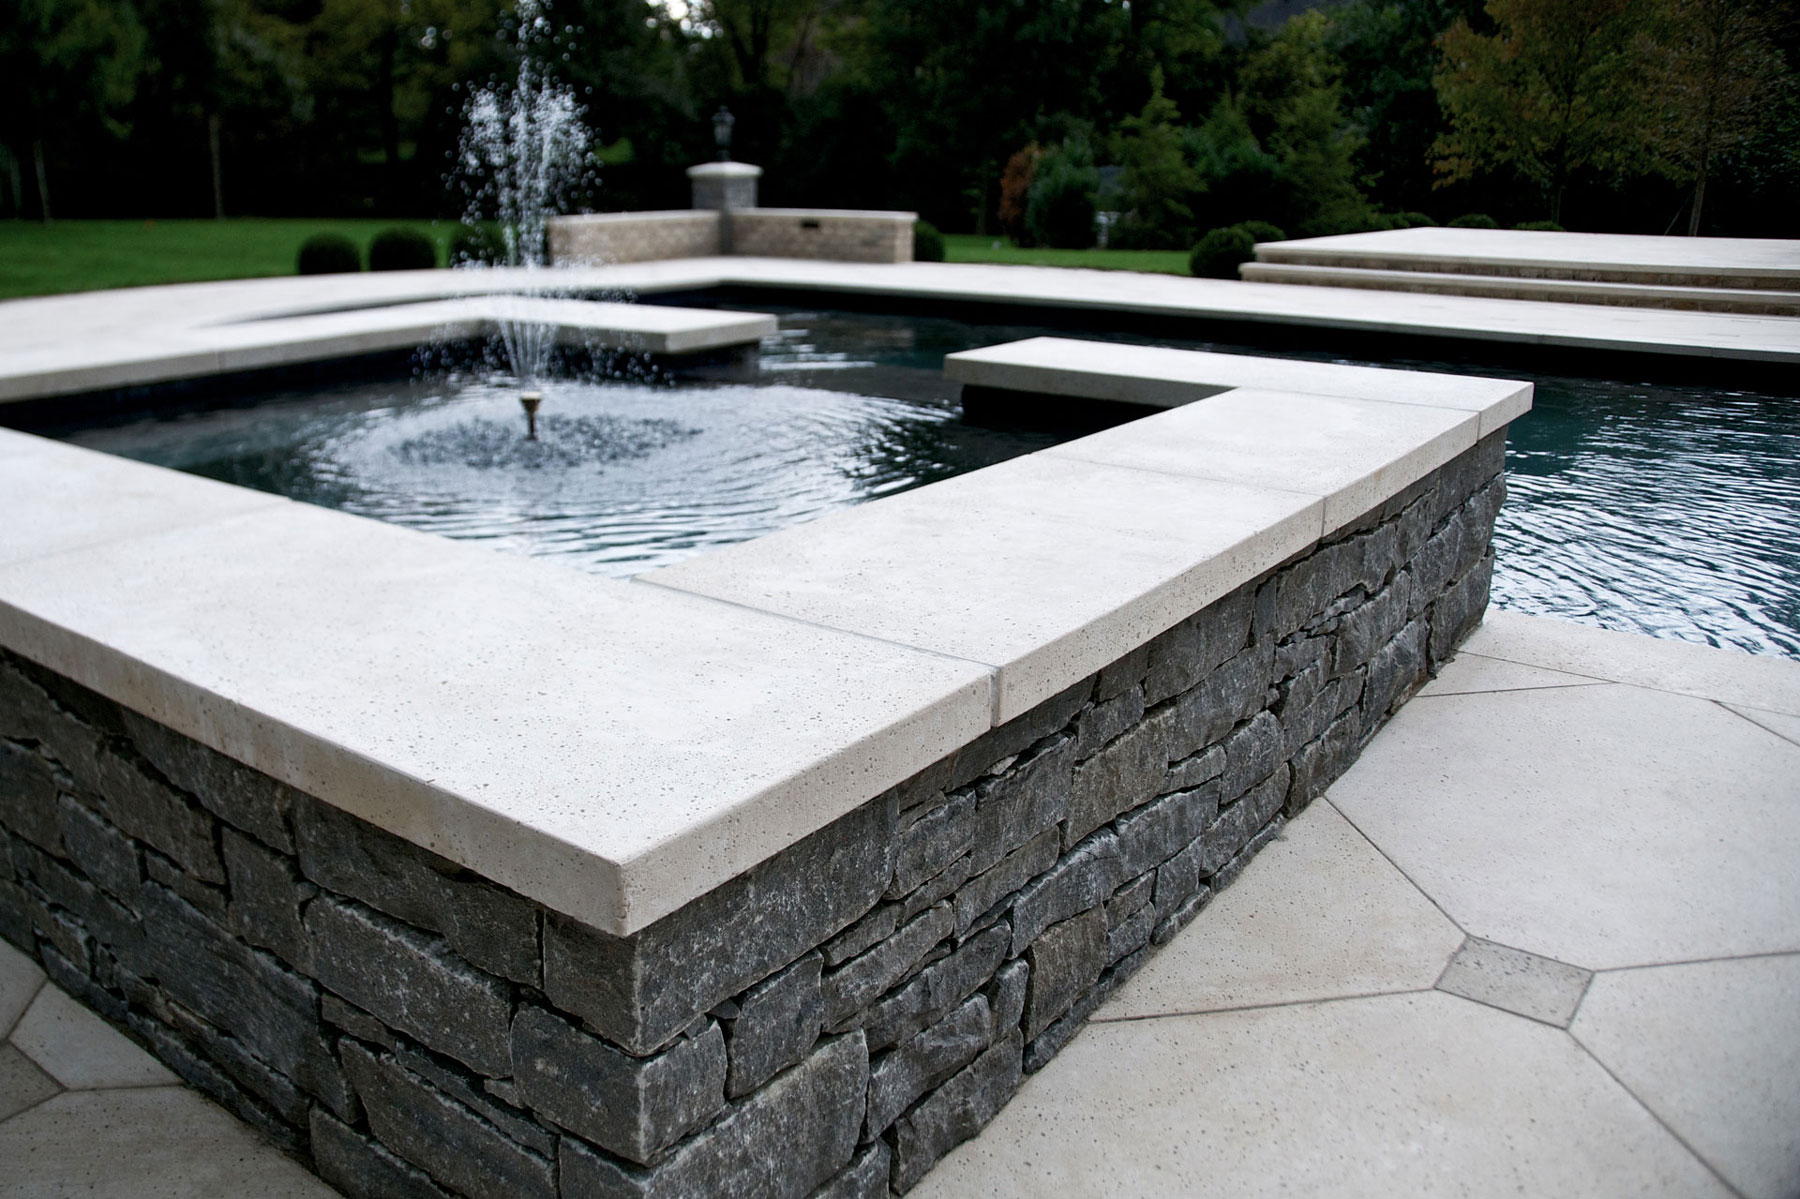 Matching coping pavers are also on the fountain next to the pool